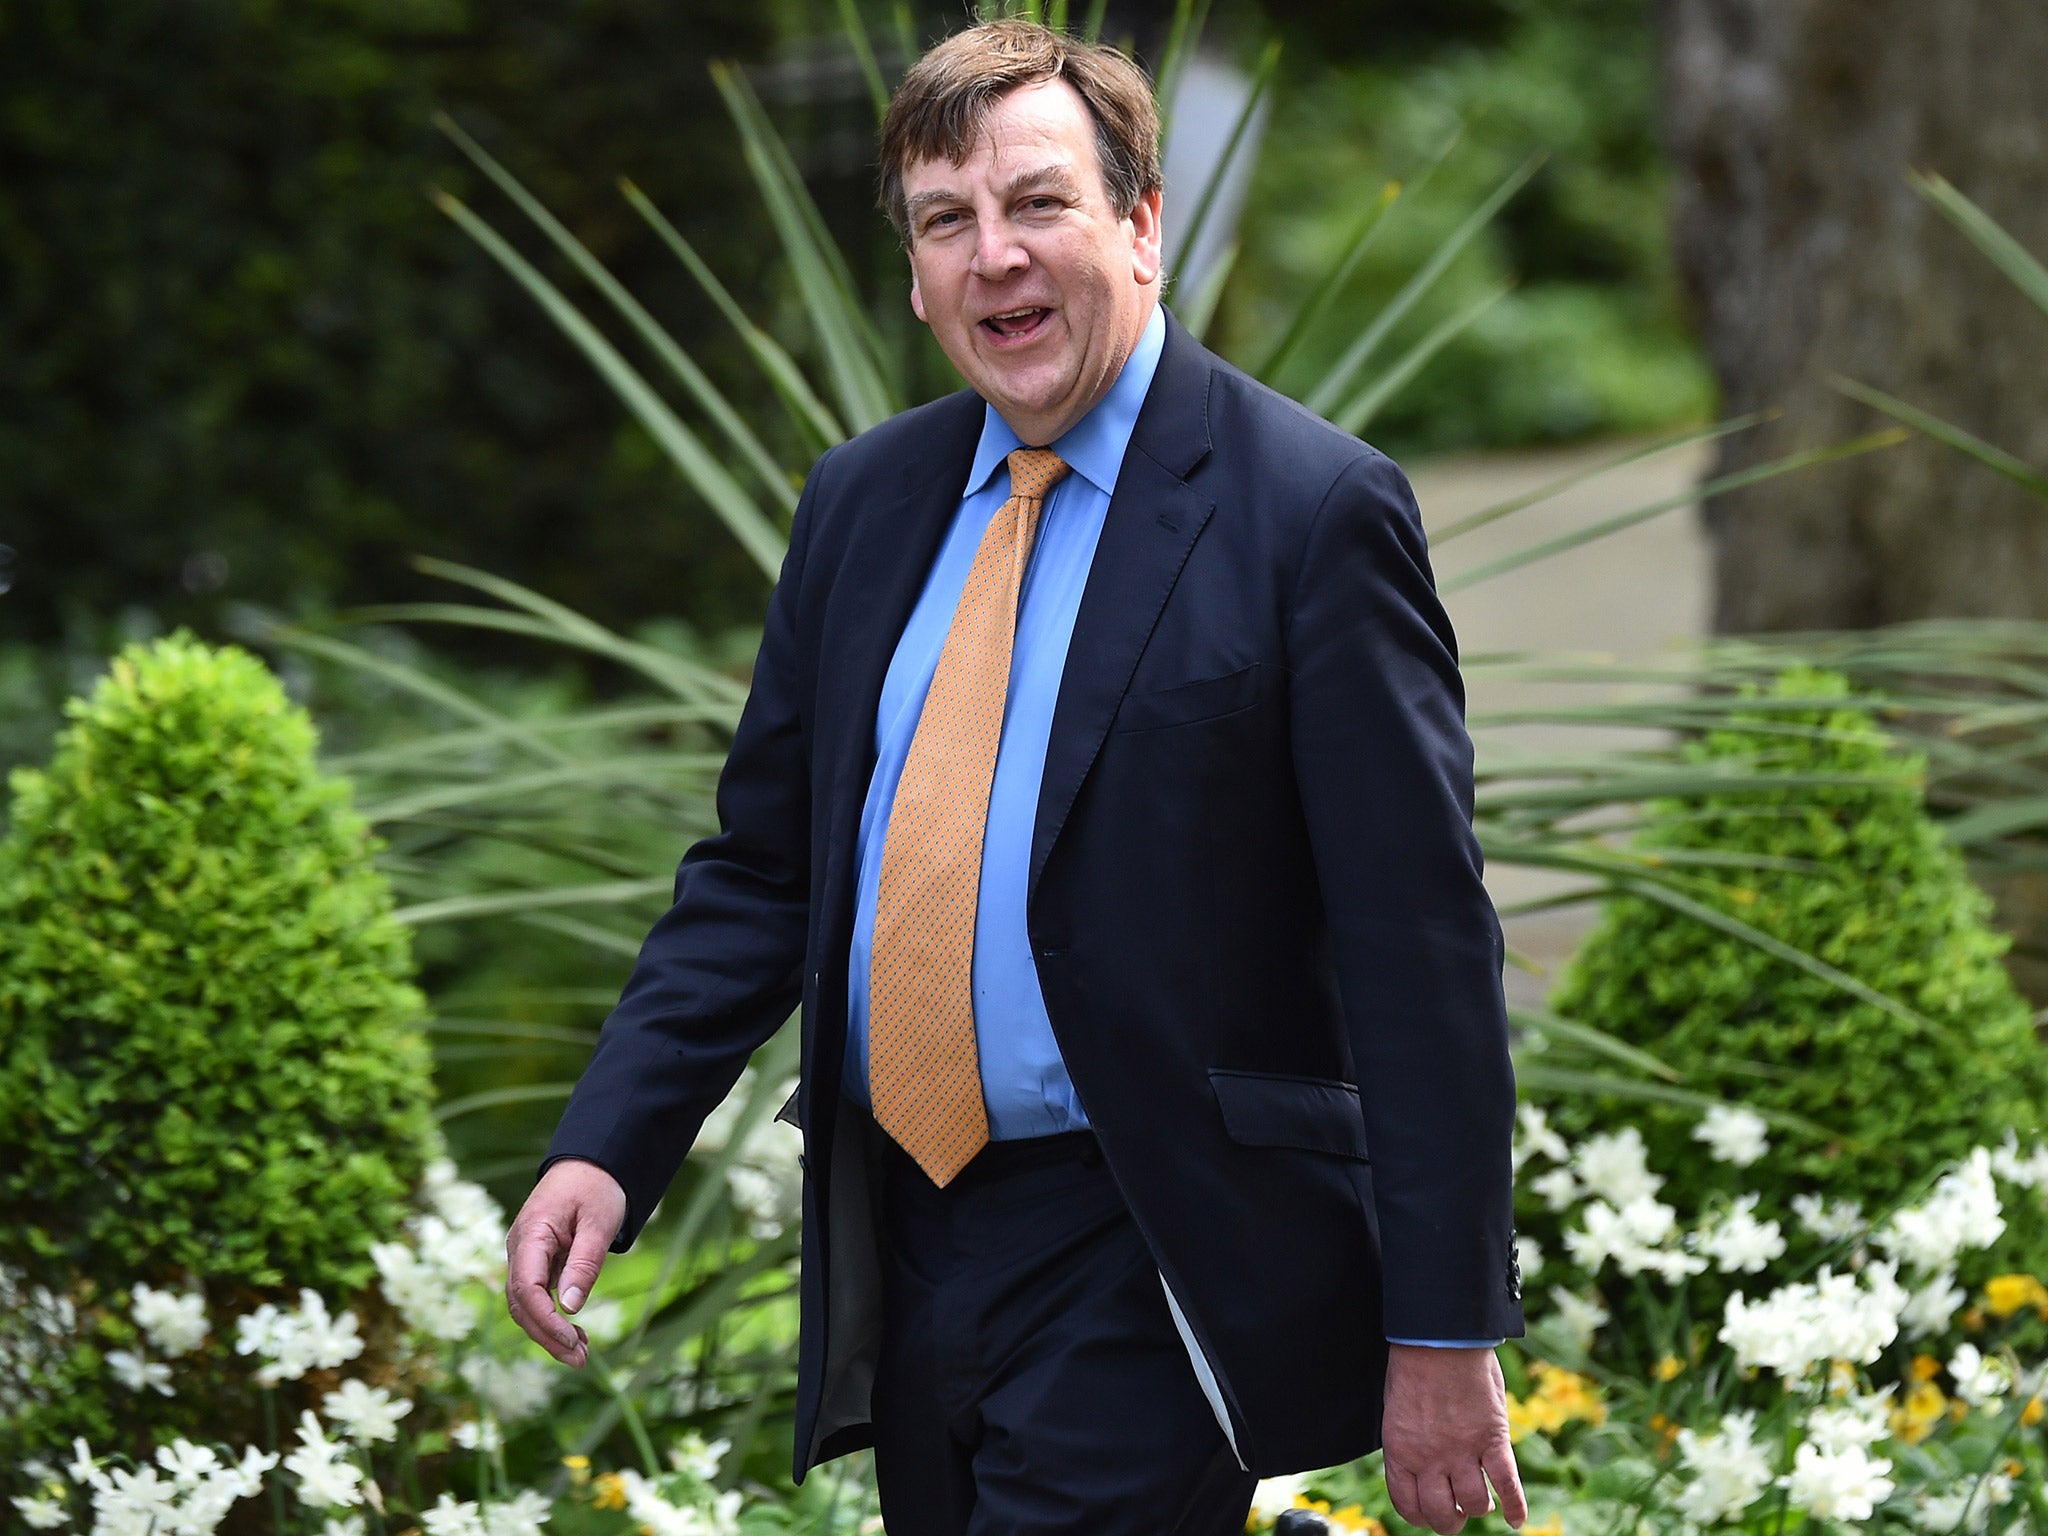 John Whittingdale, Secretary of State for Culture Media and Sport